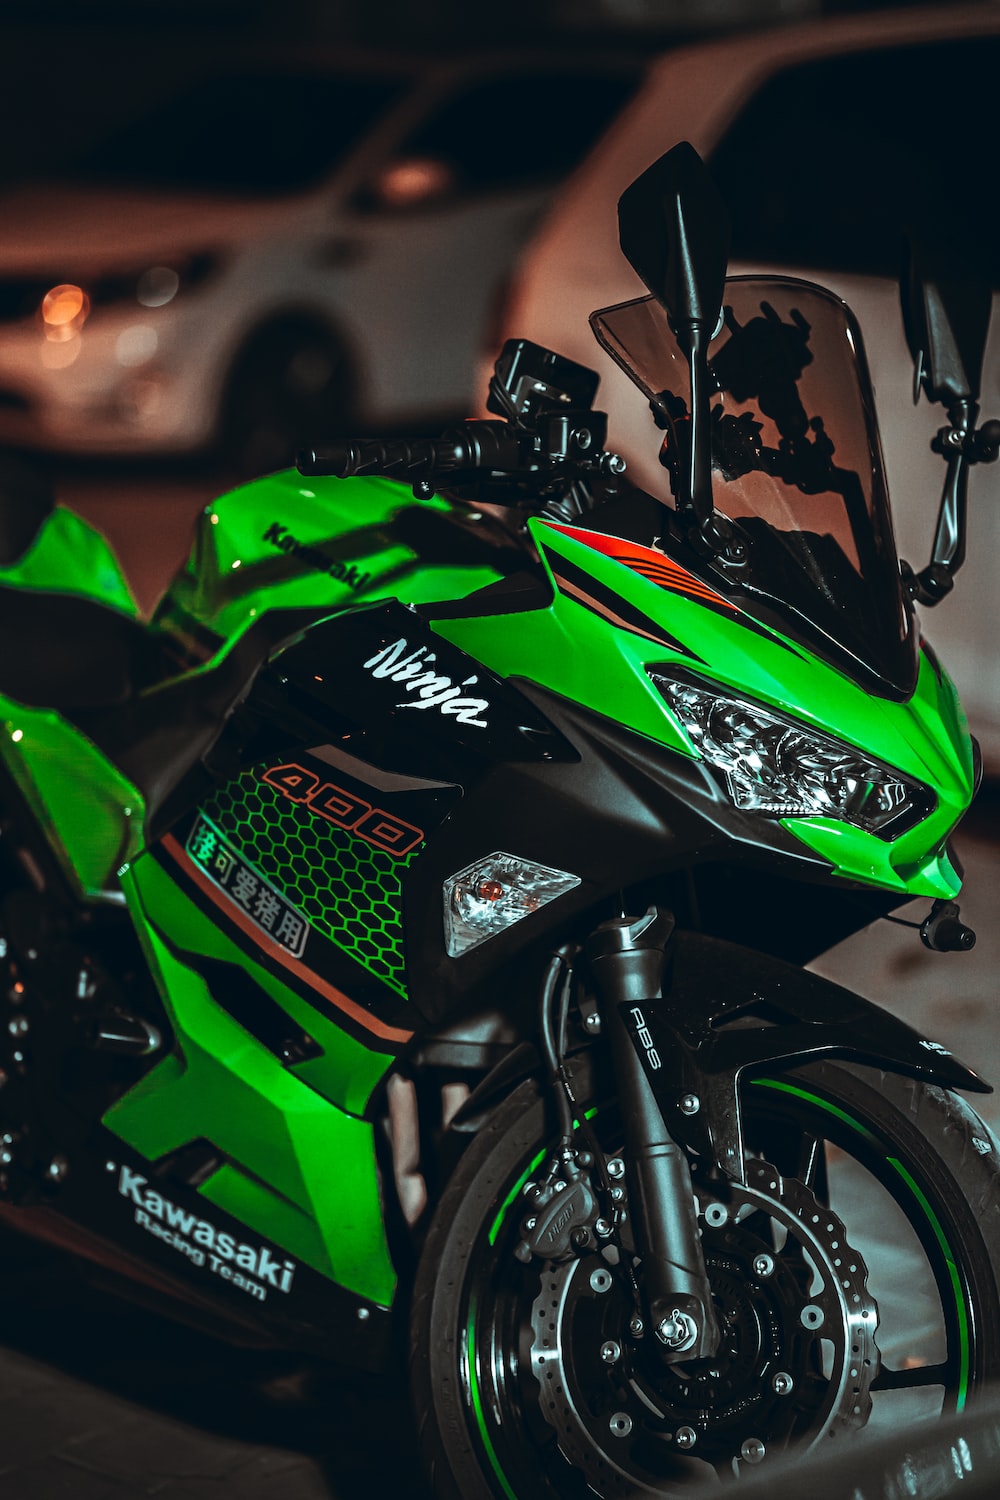 Kawasaki pictures download free images on